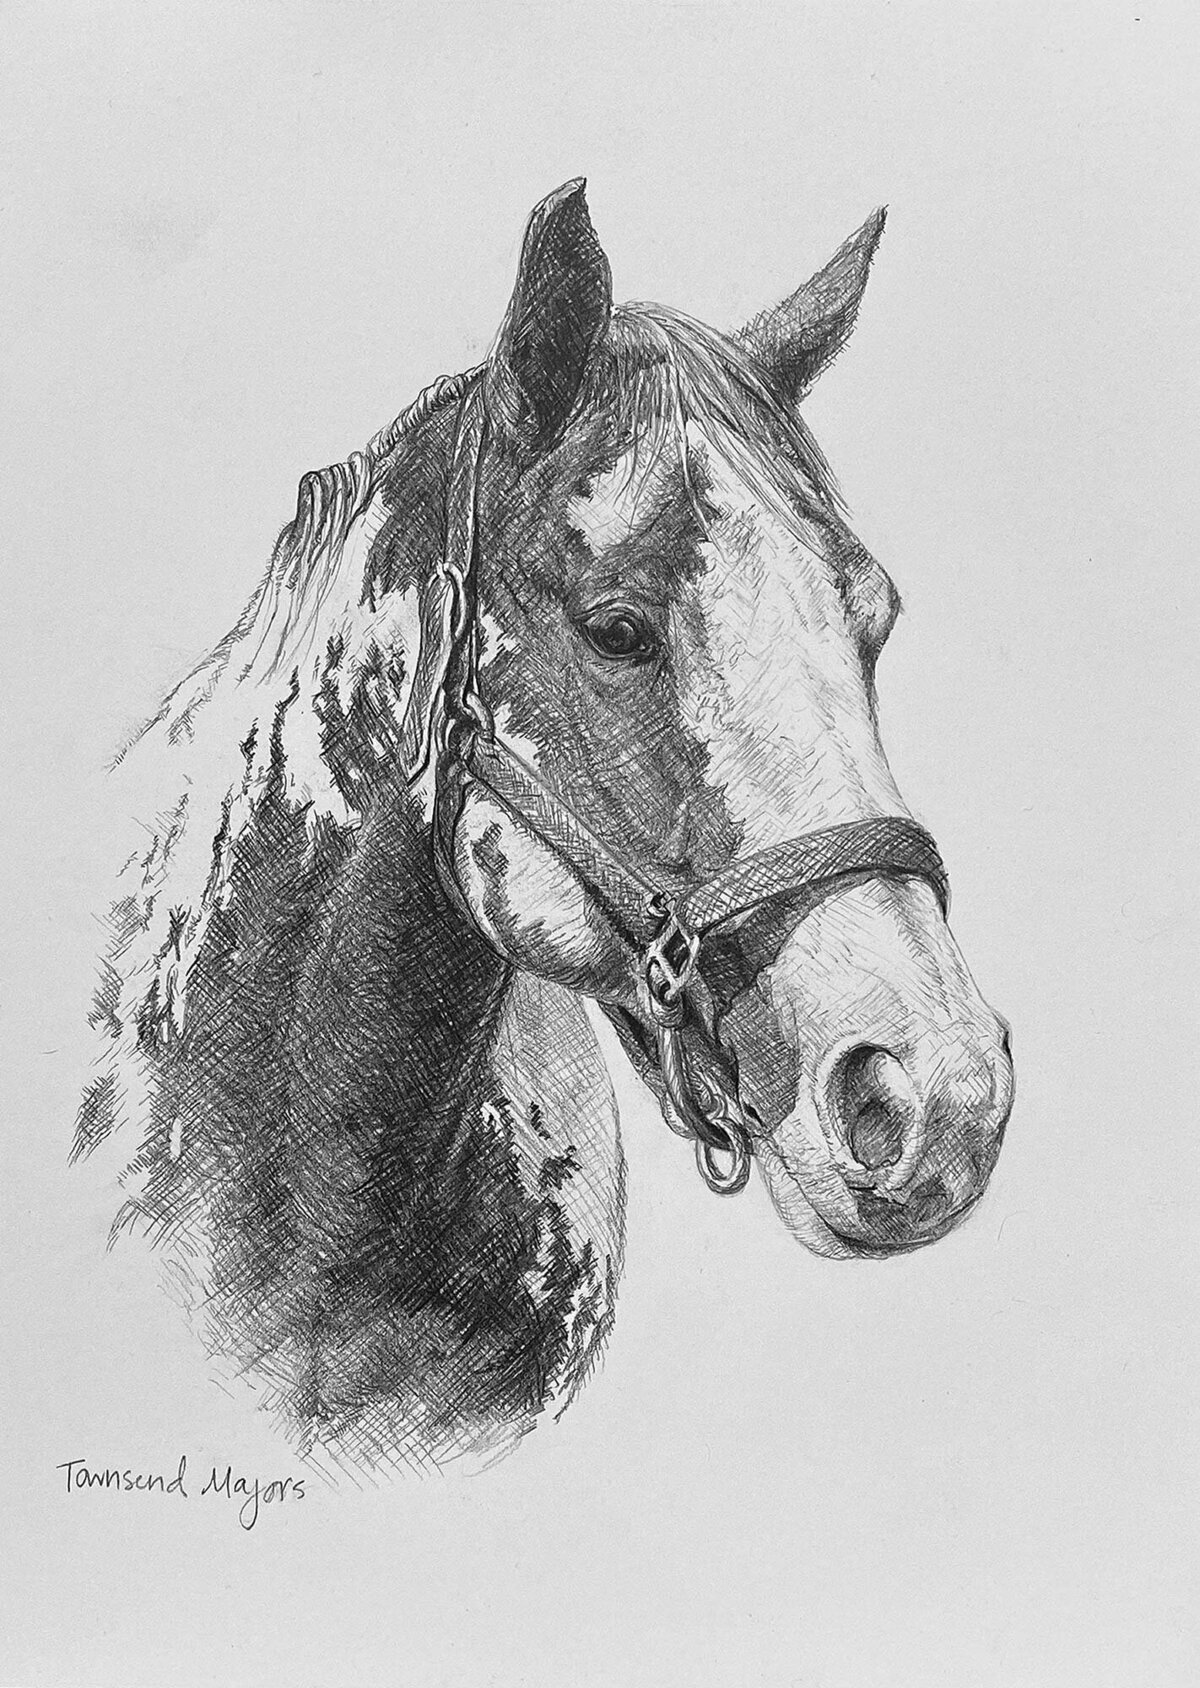 Townsend Majors' graphite drawing of a horse